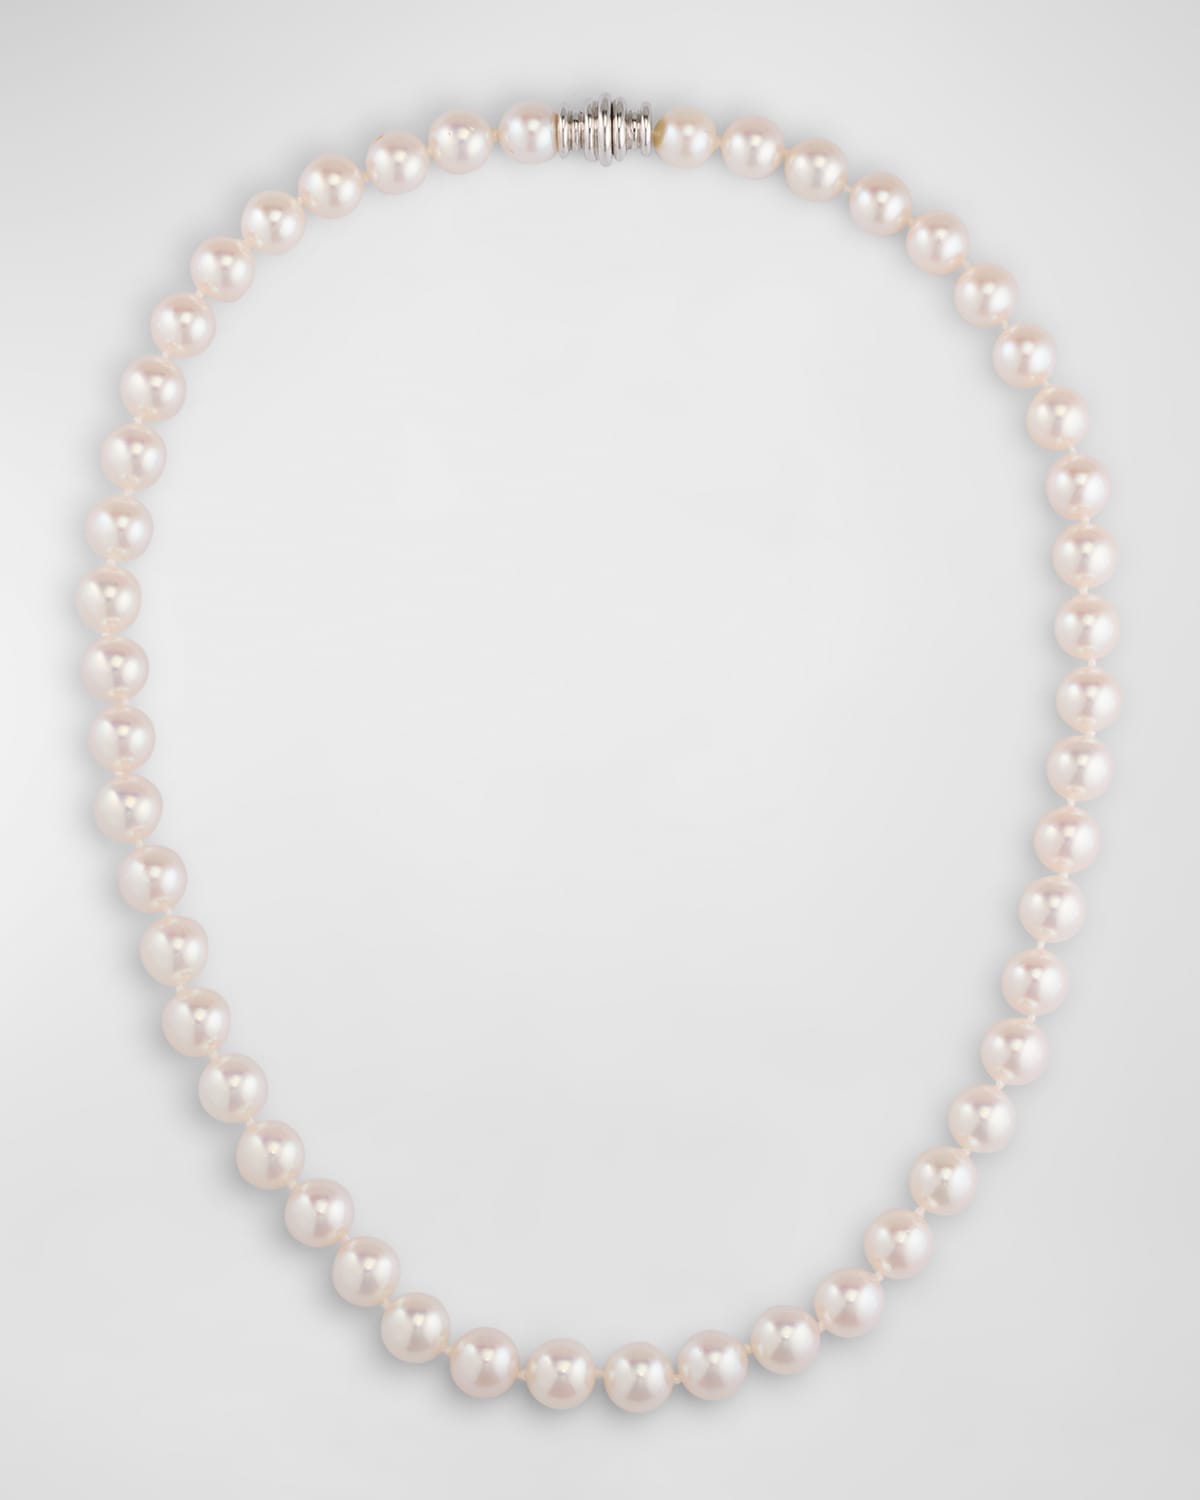 18K White Gold Akoya Cultured Pearl Necklace, 7.5-8mm